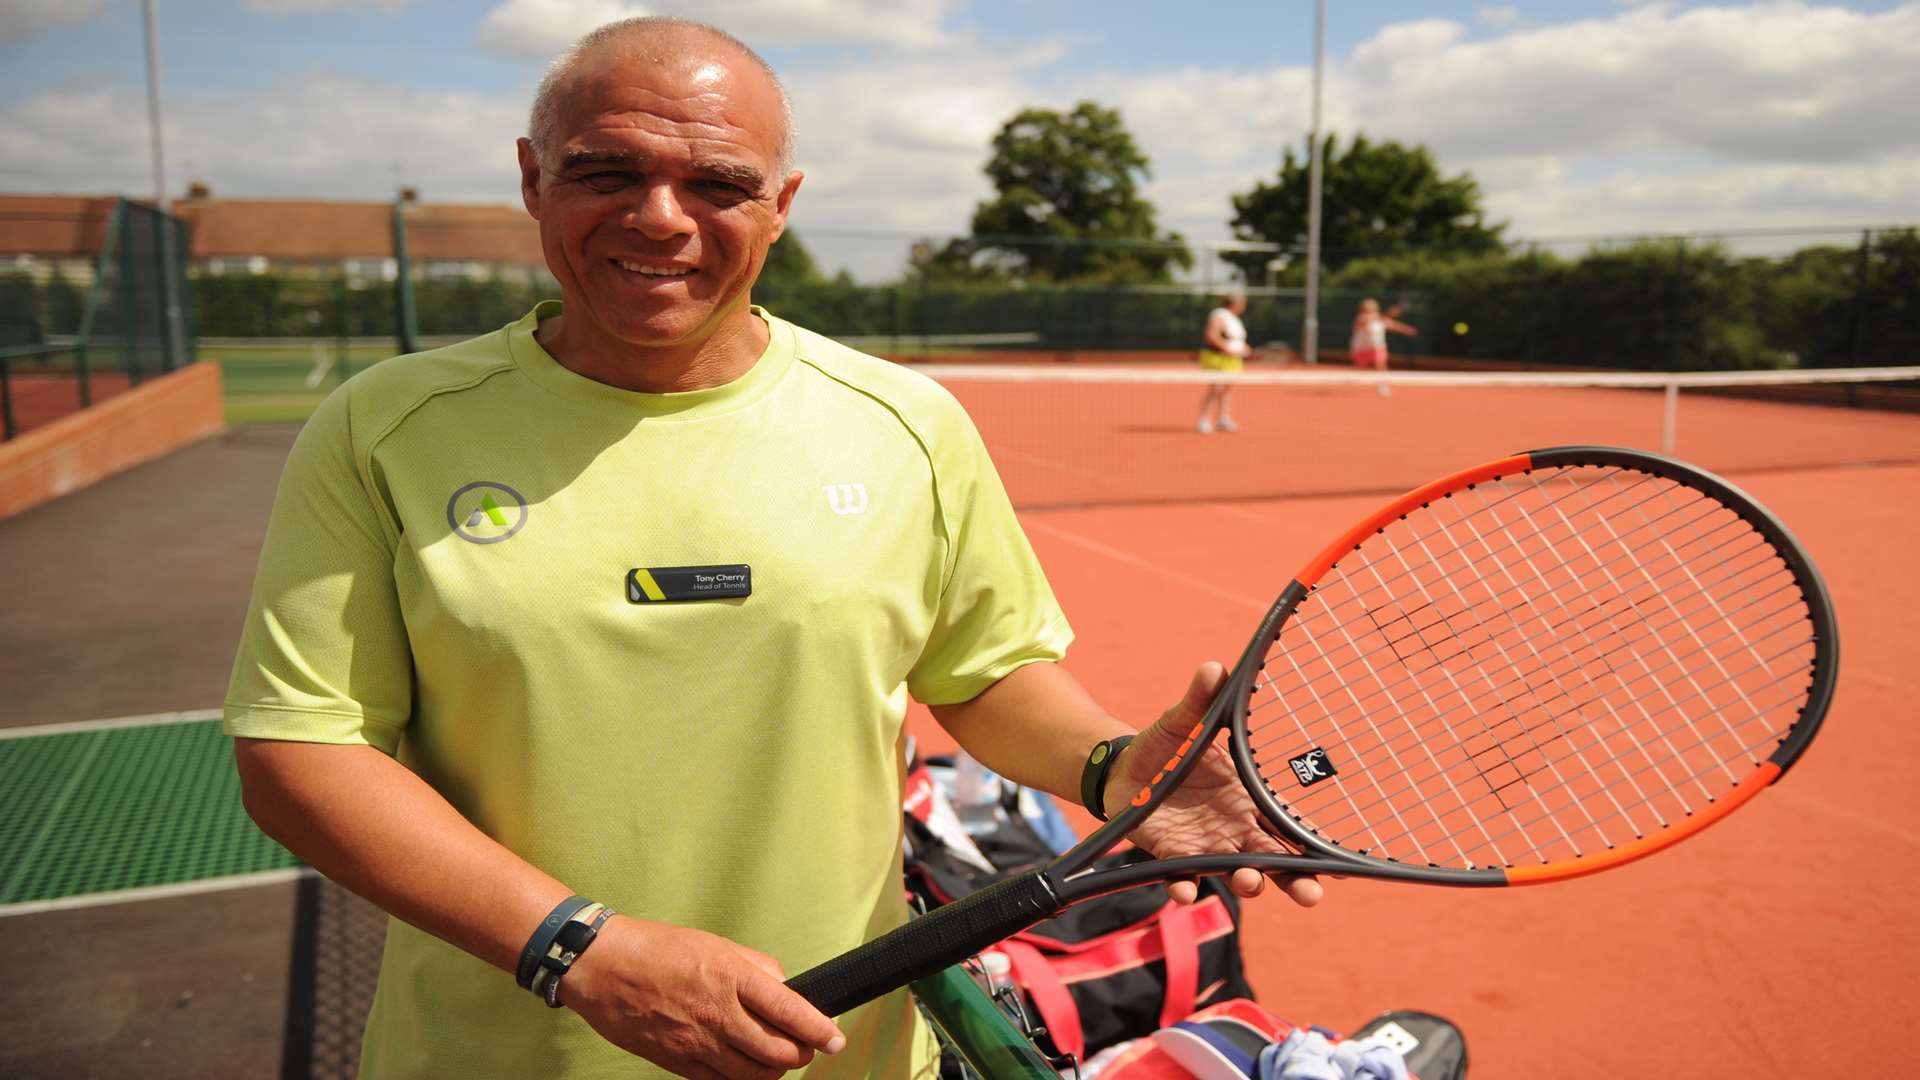 Avenue Tennis coach Tony Cherry on the clay courts Picture: Steve Crispe